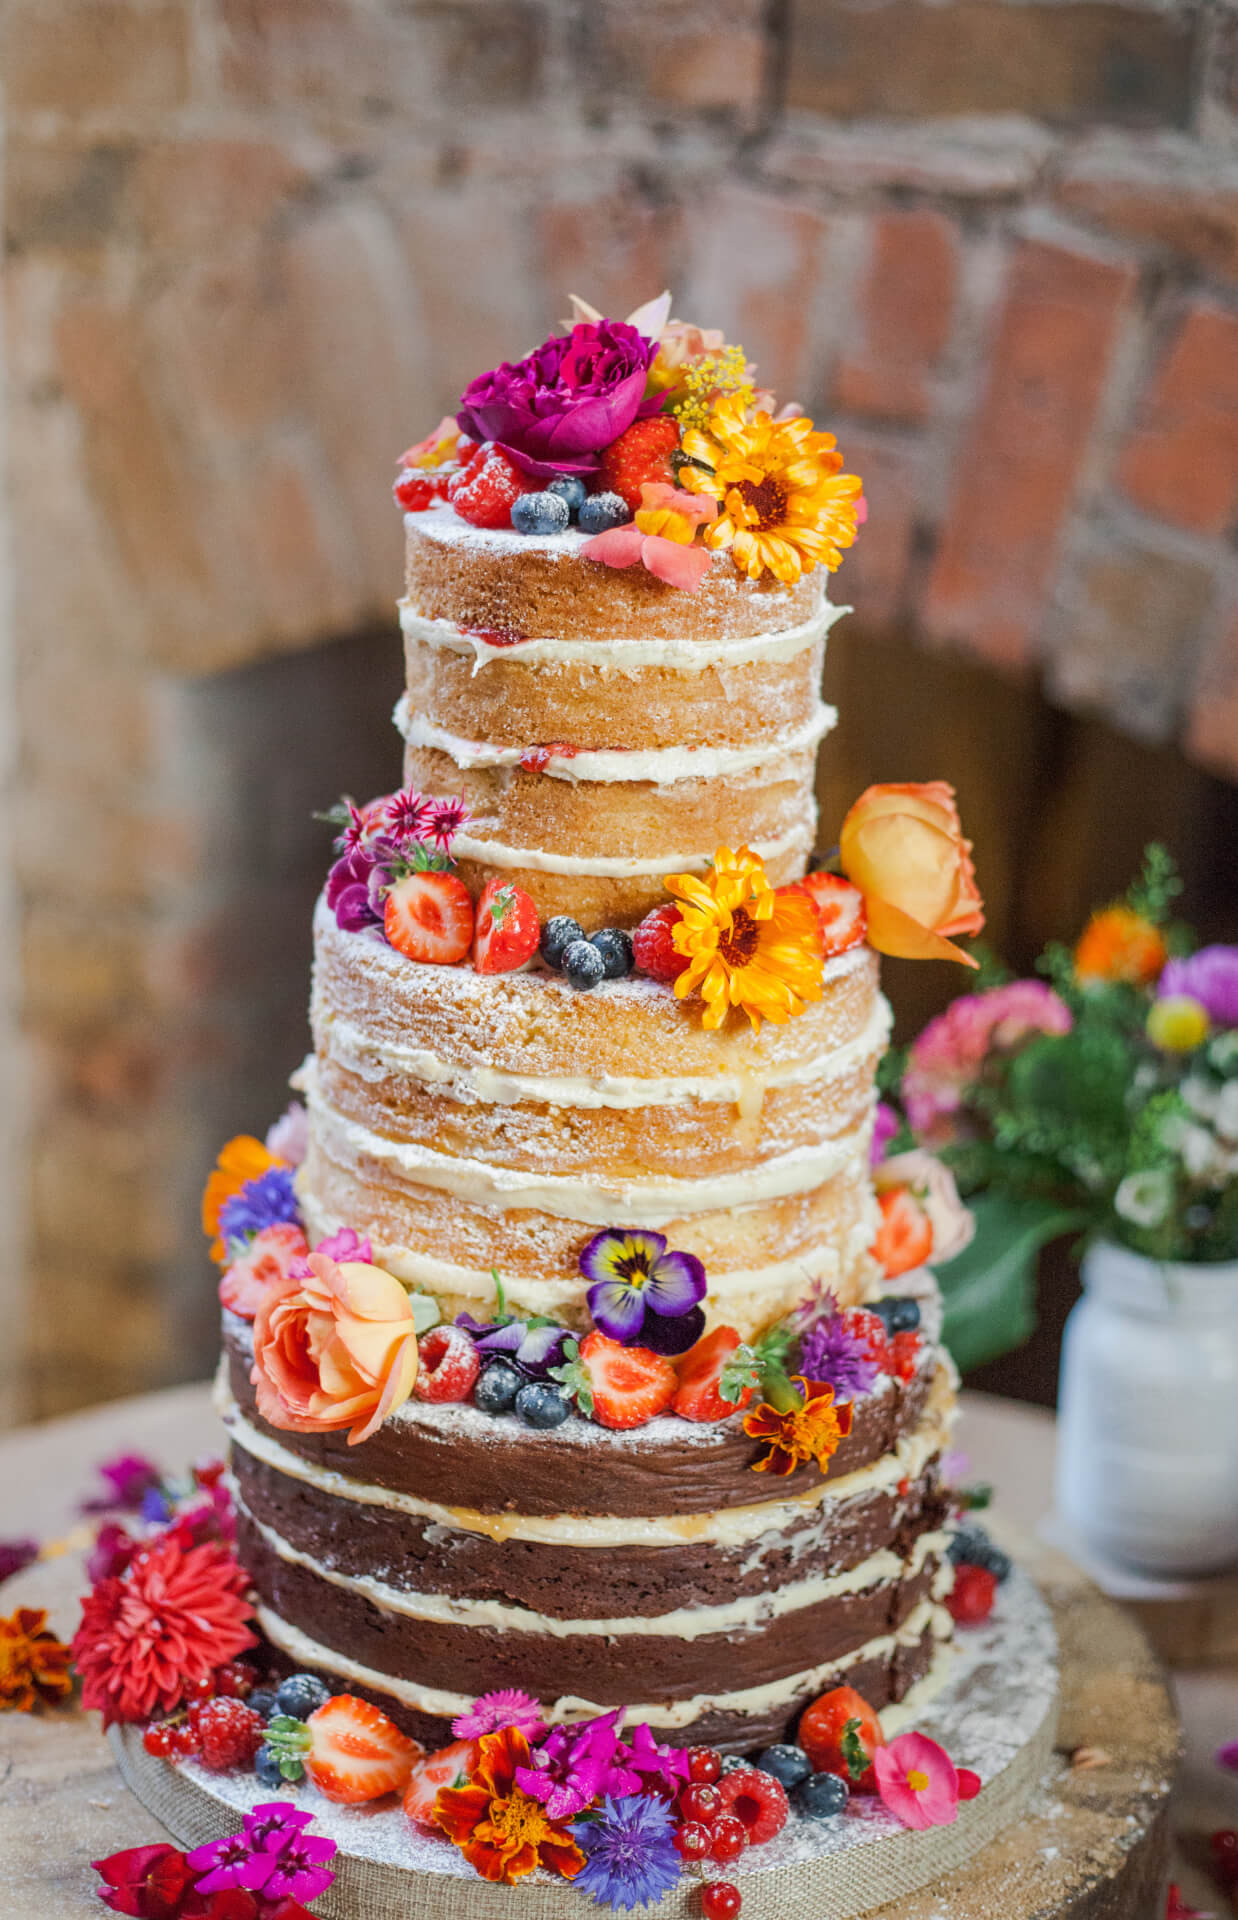 Wedding Cakes With Flowers
 Edible Flowers for Naked Wedding Cakes Fresh Edible